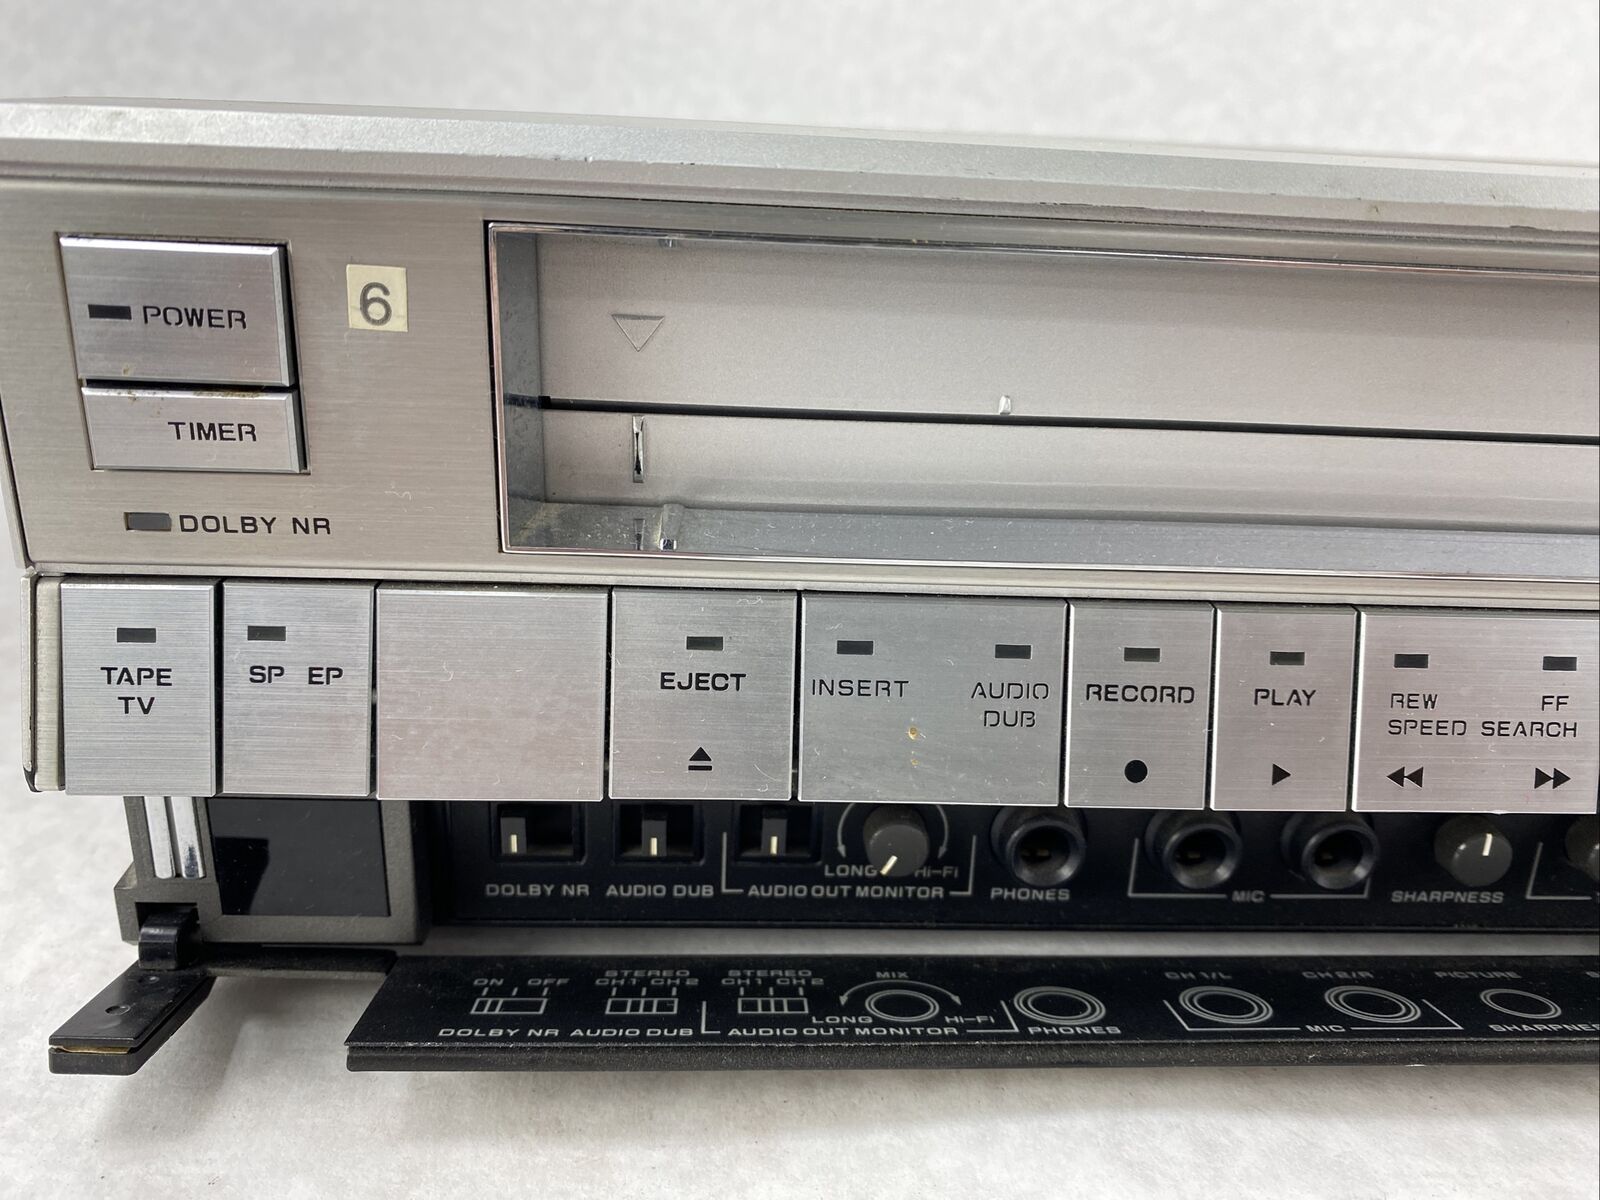 Vintage Zenith VR 4000 VCR VHS Video Recorder POWERS ON